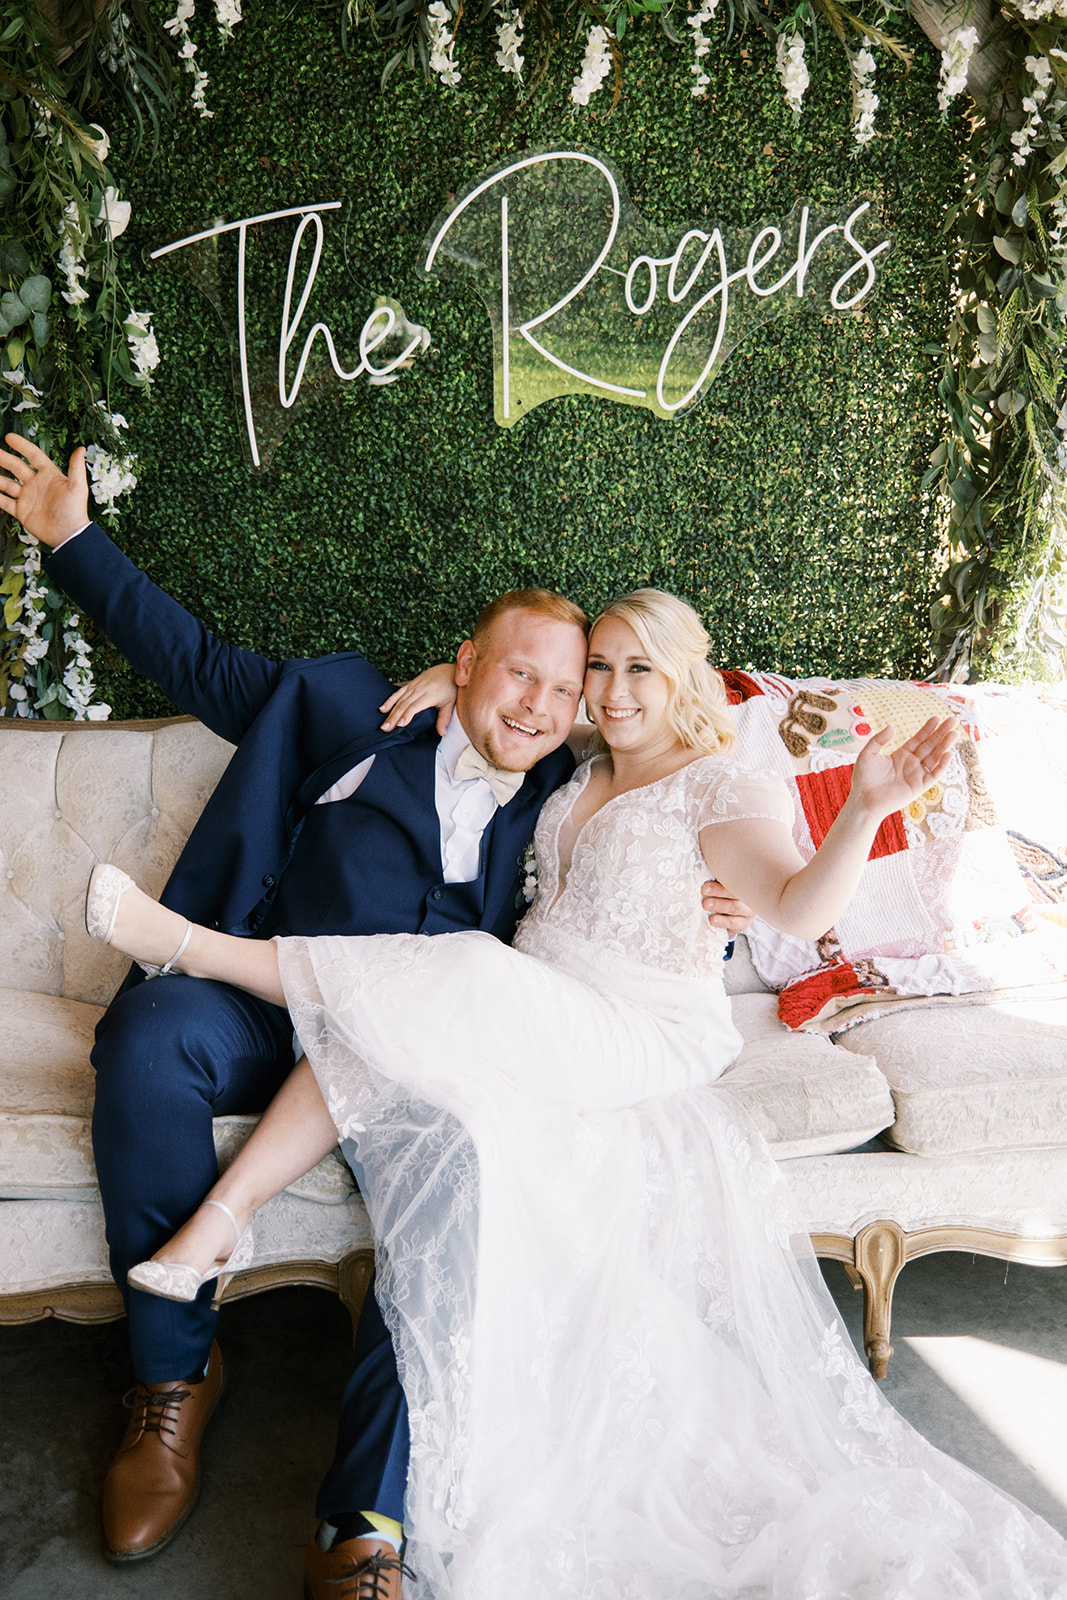 The bride and groom sit on their sofa rental where their photobooth sits on their wedding day